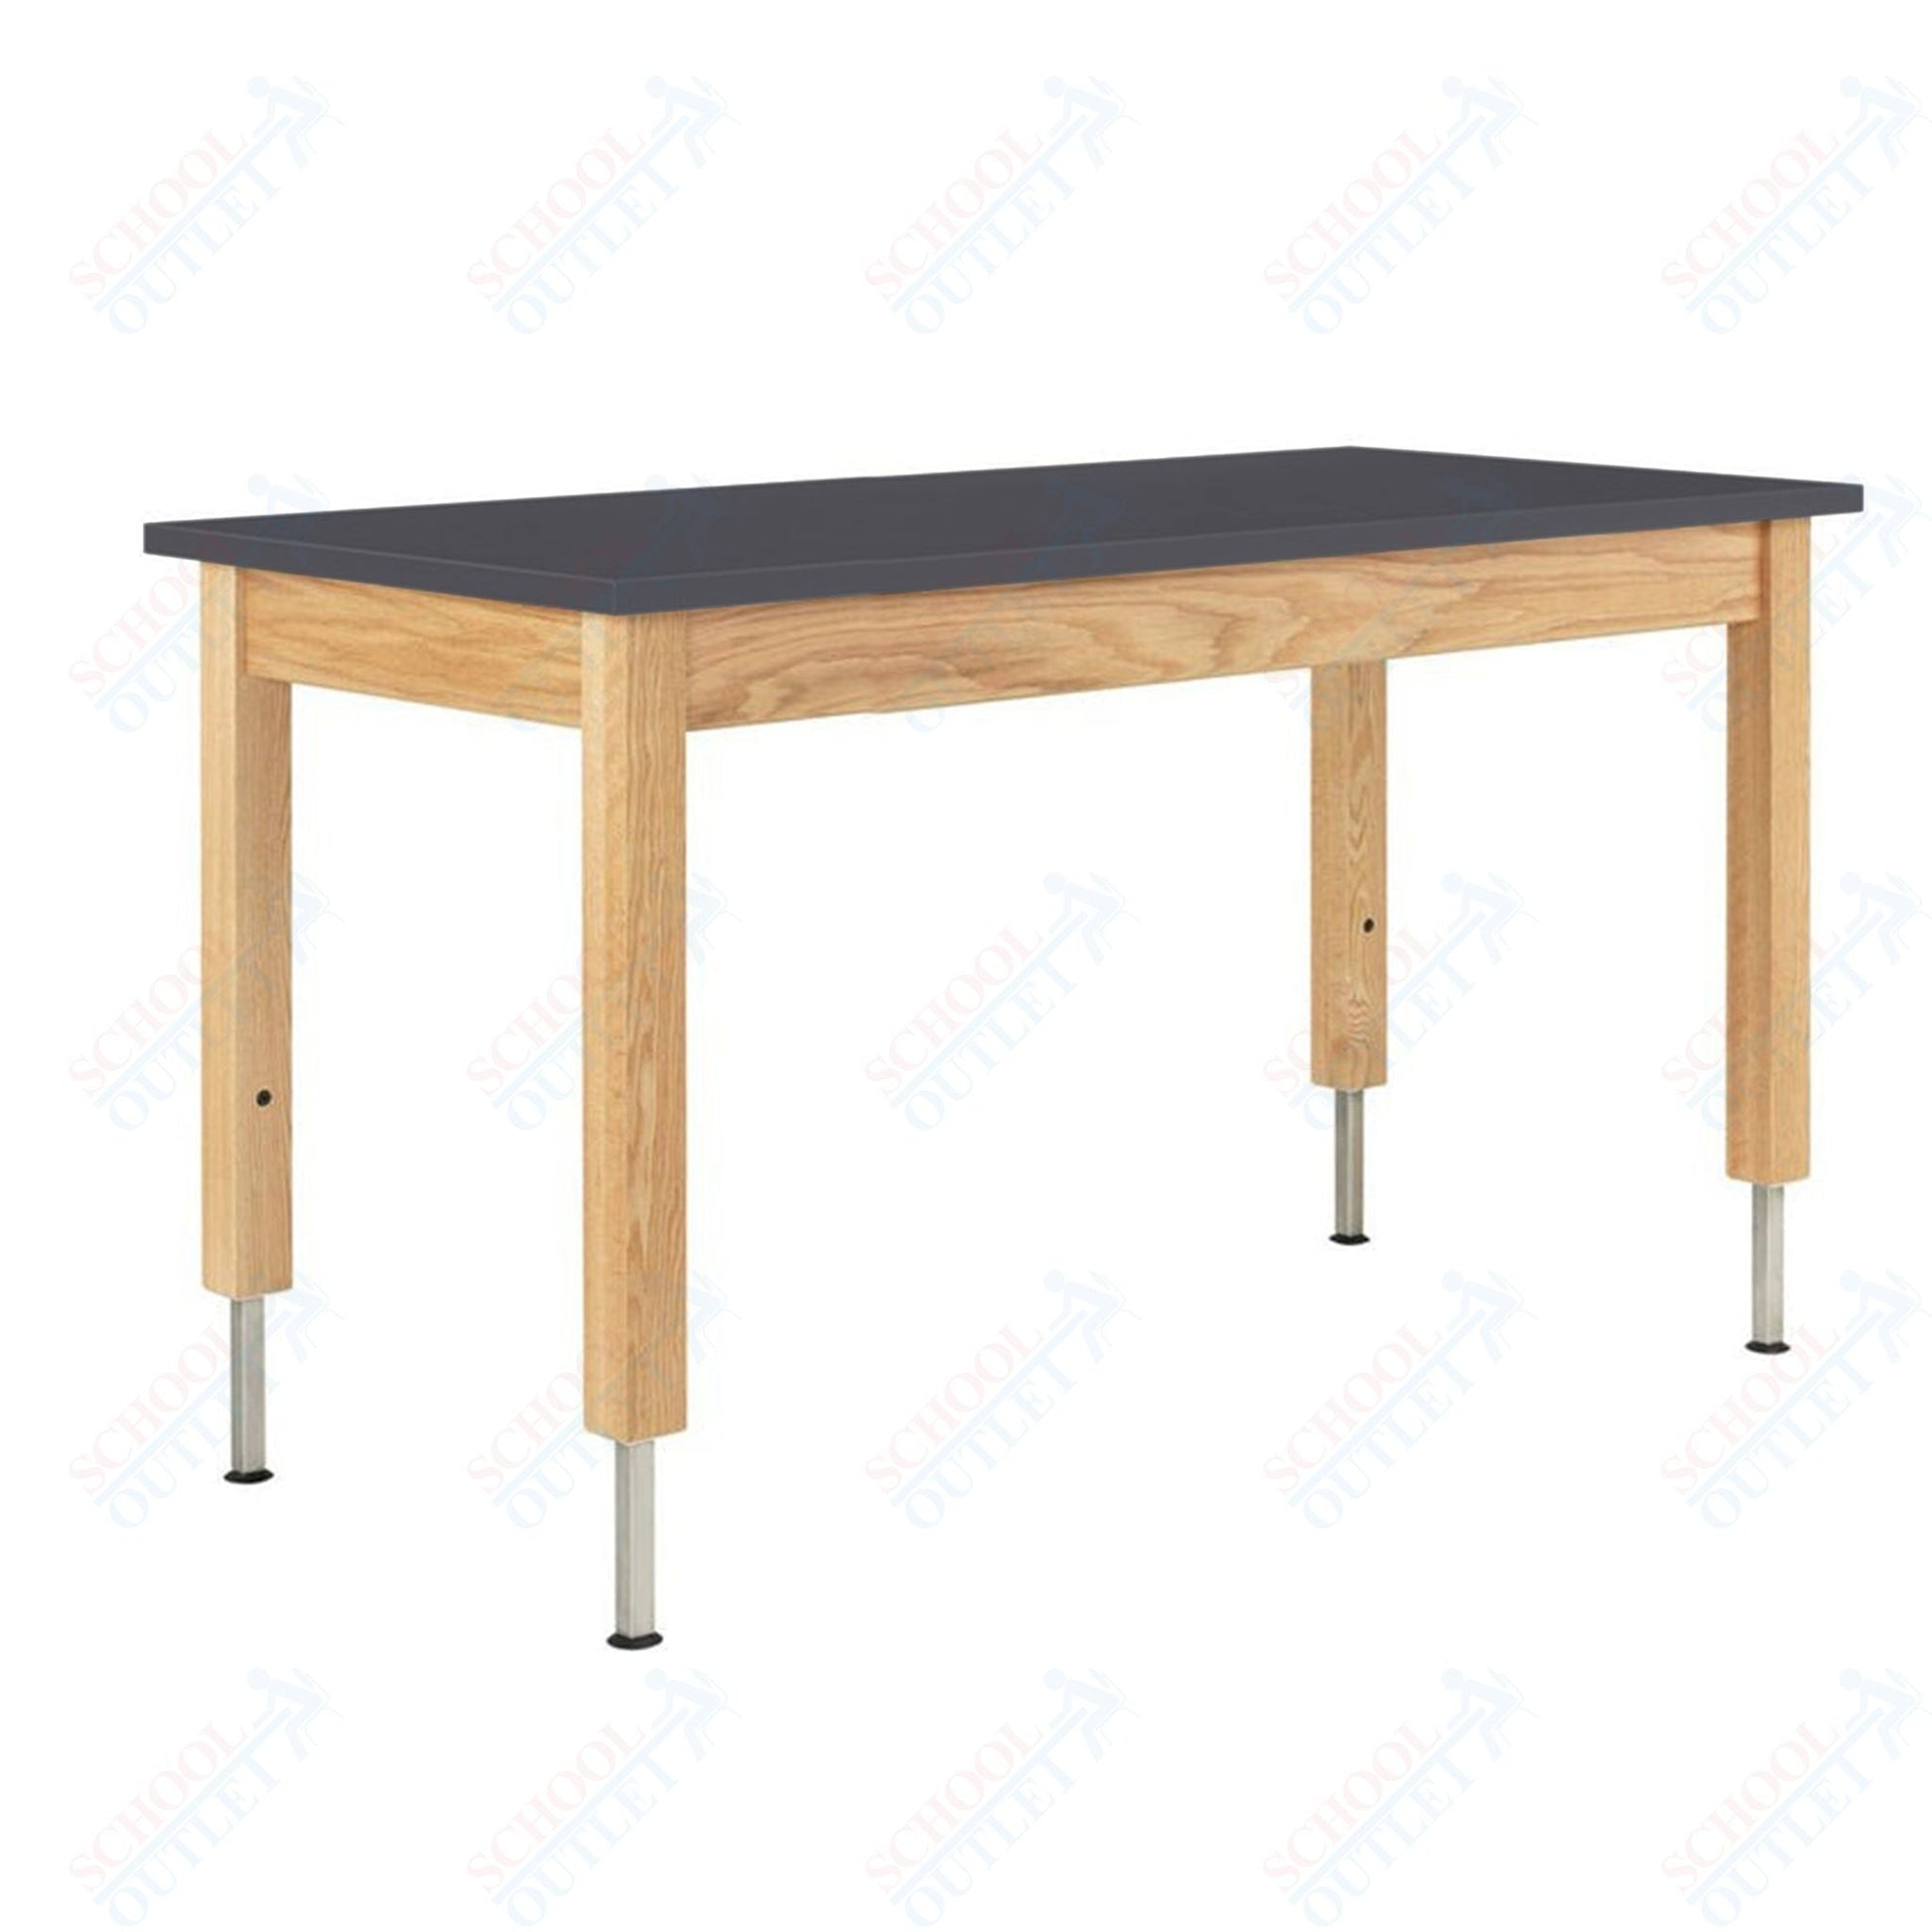 Diversified Woodcrafts Adjustable Wooden Leg Science Table - 54" W x 24" D - SchoolOutlet